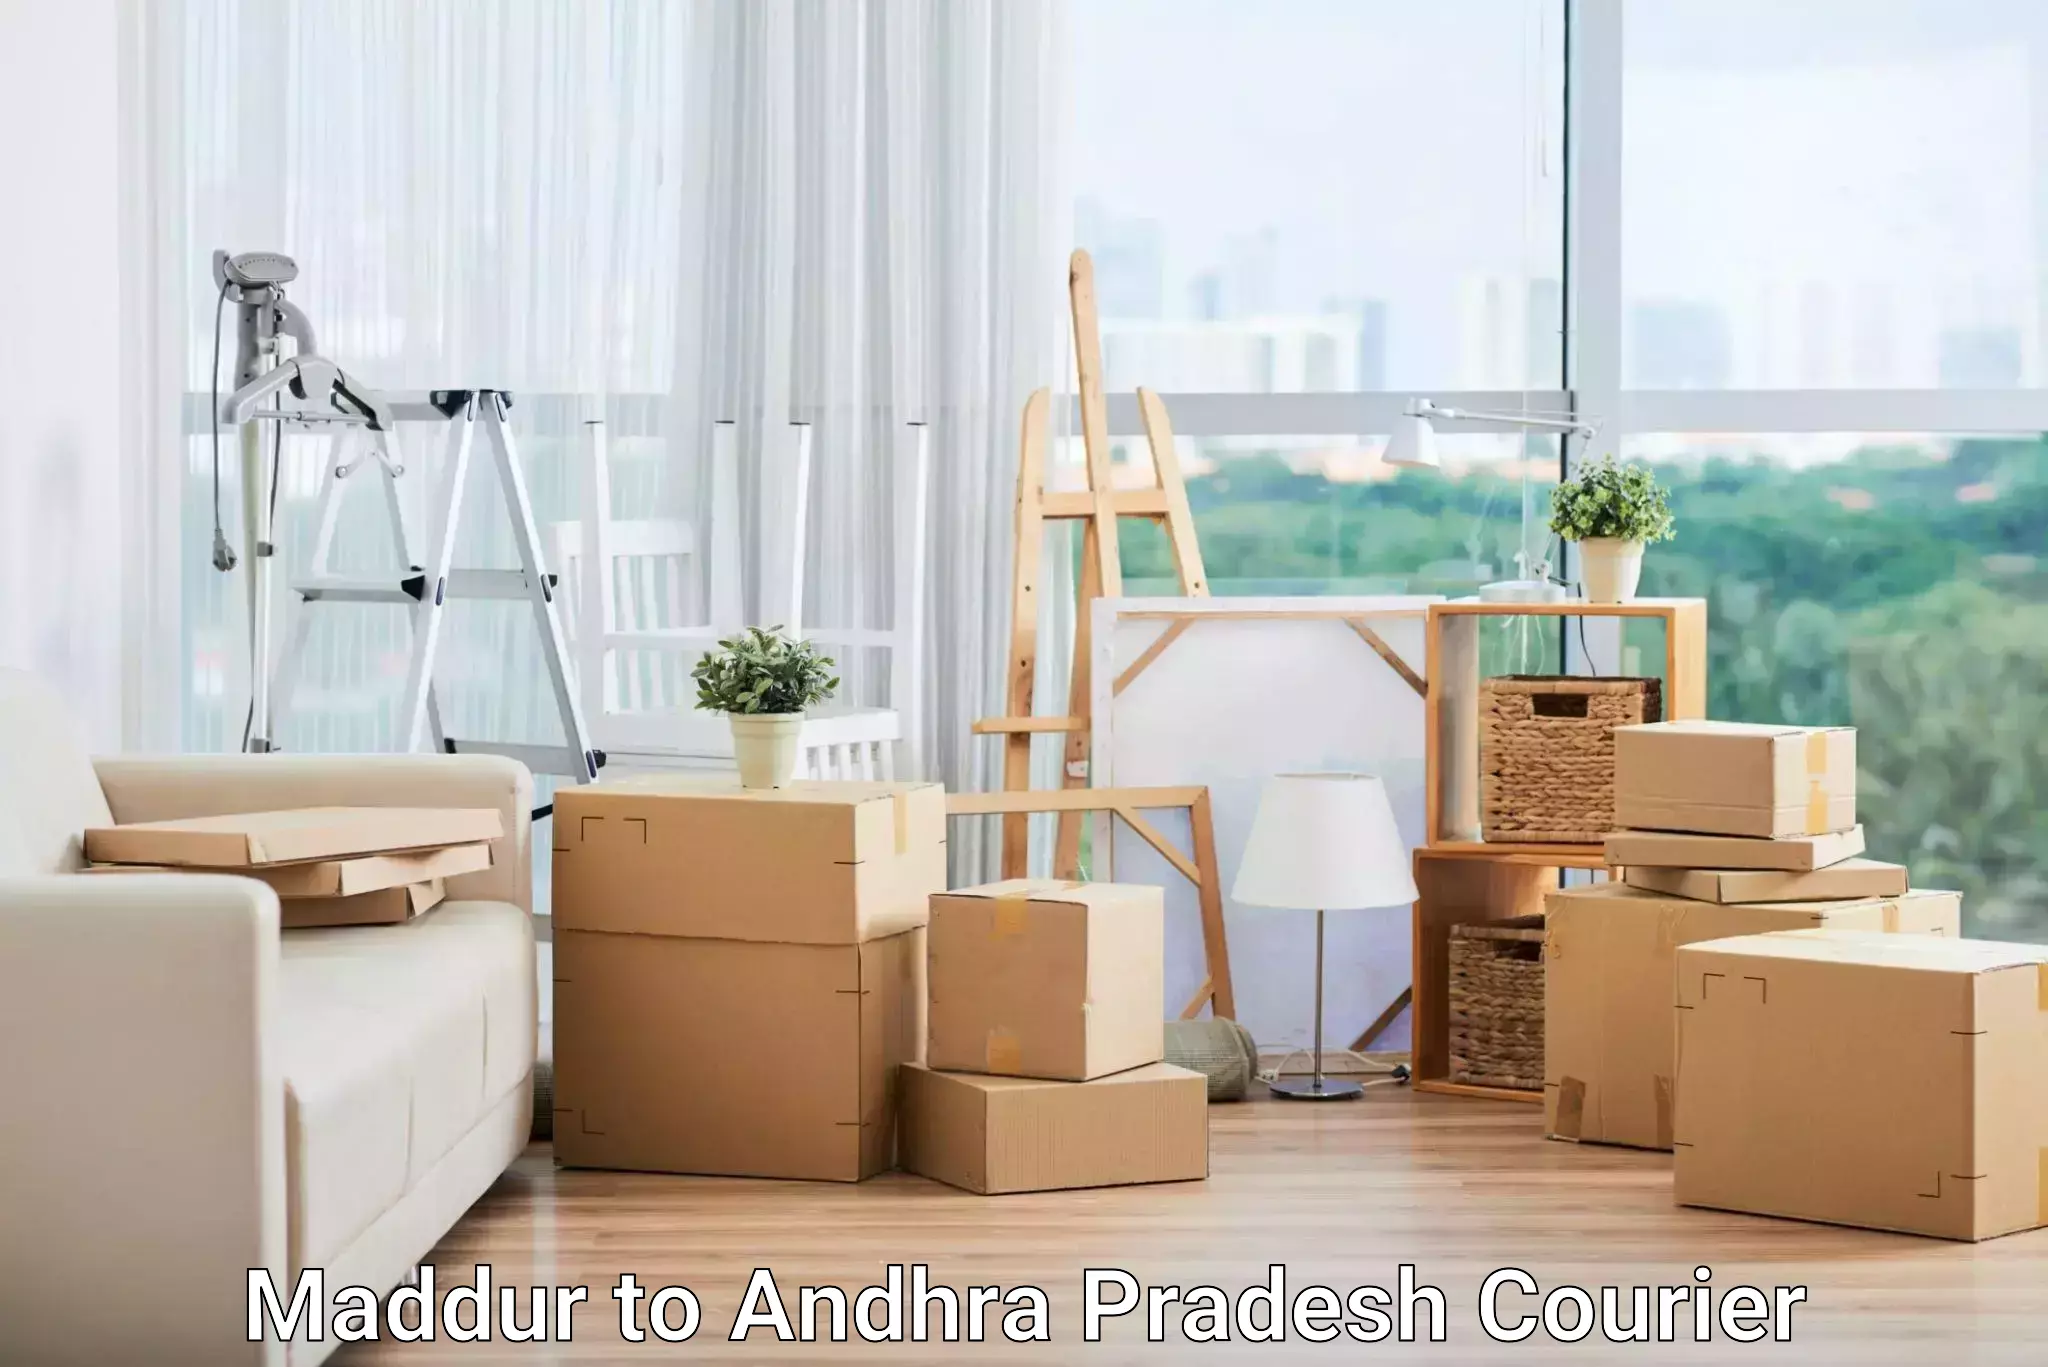 Flexible delivery schedules Maddur to Cuddapah